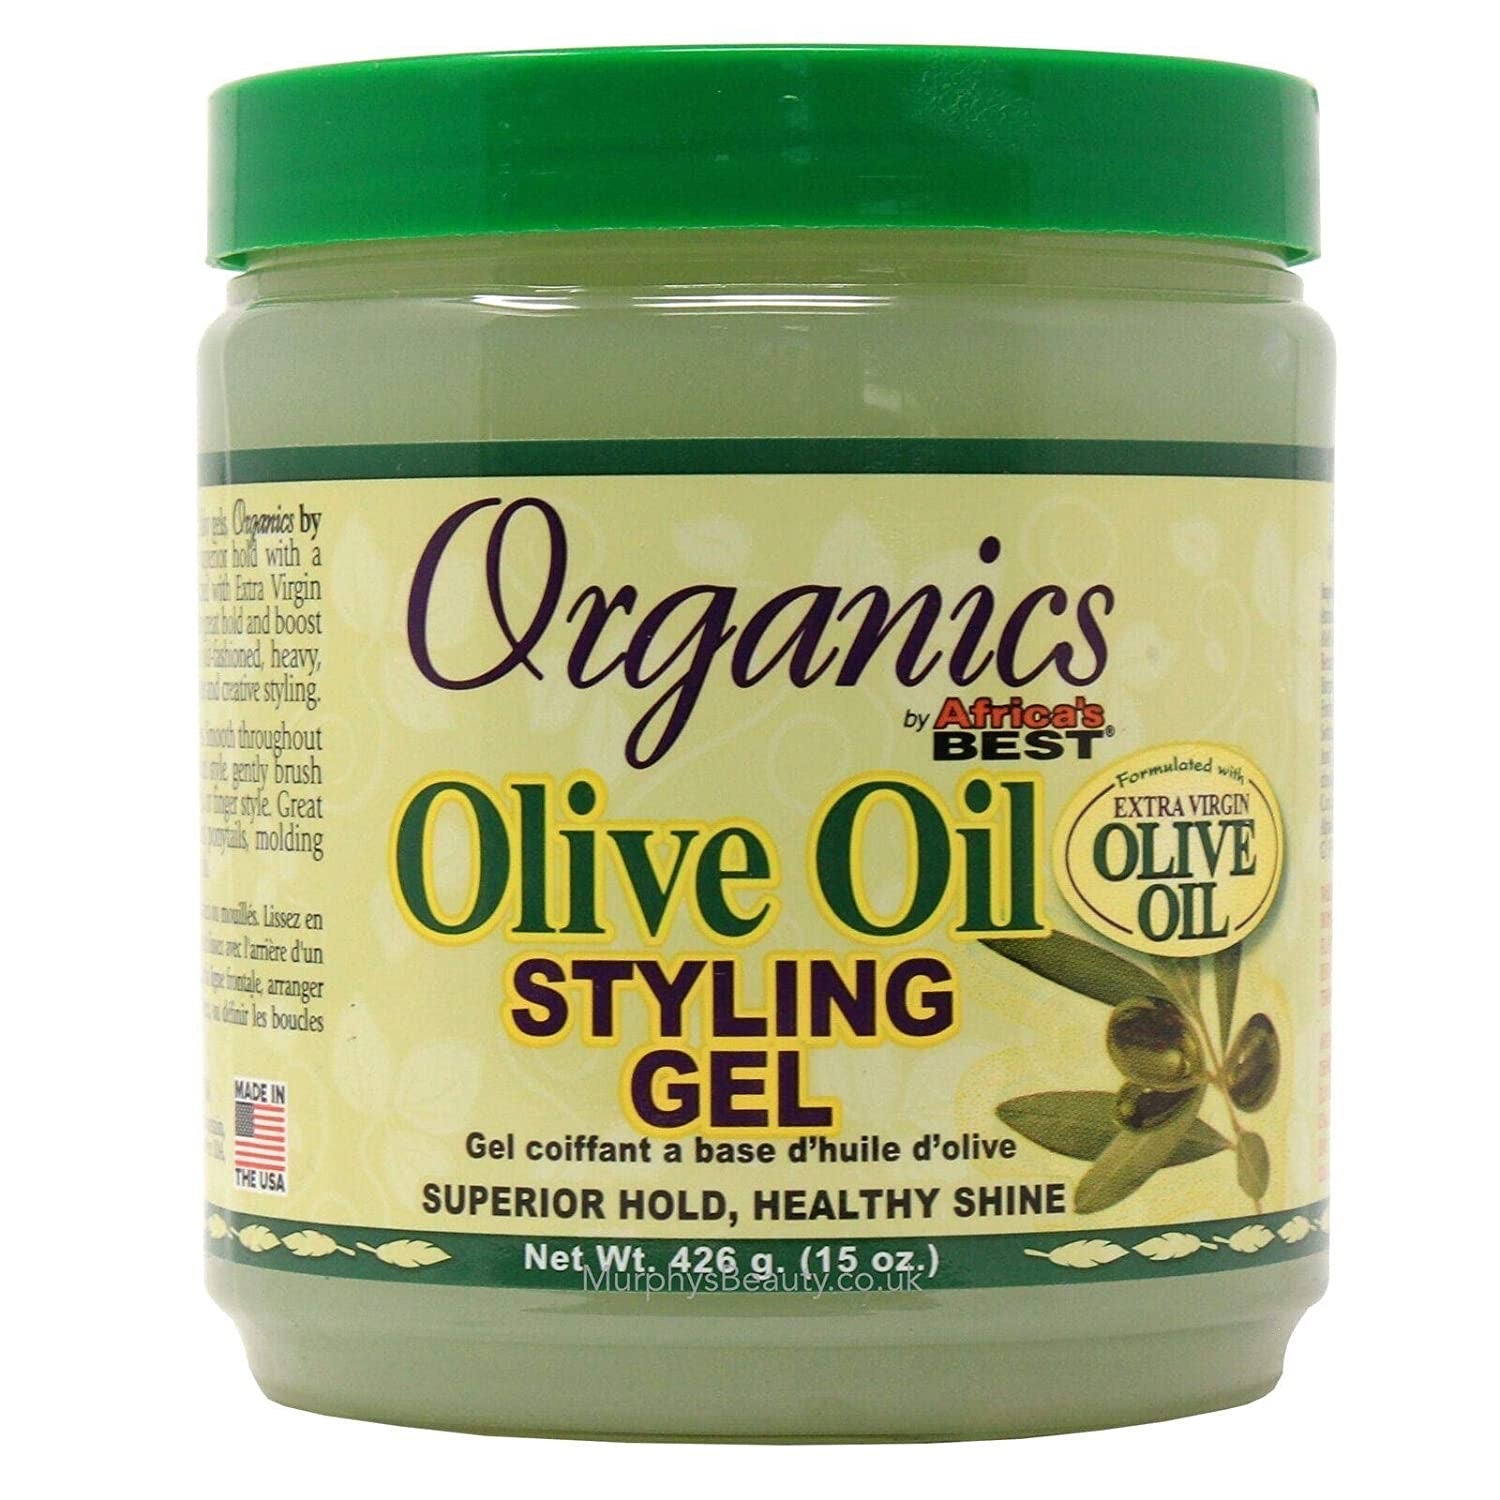 African’s best organic olive oil styling gel 444ml